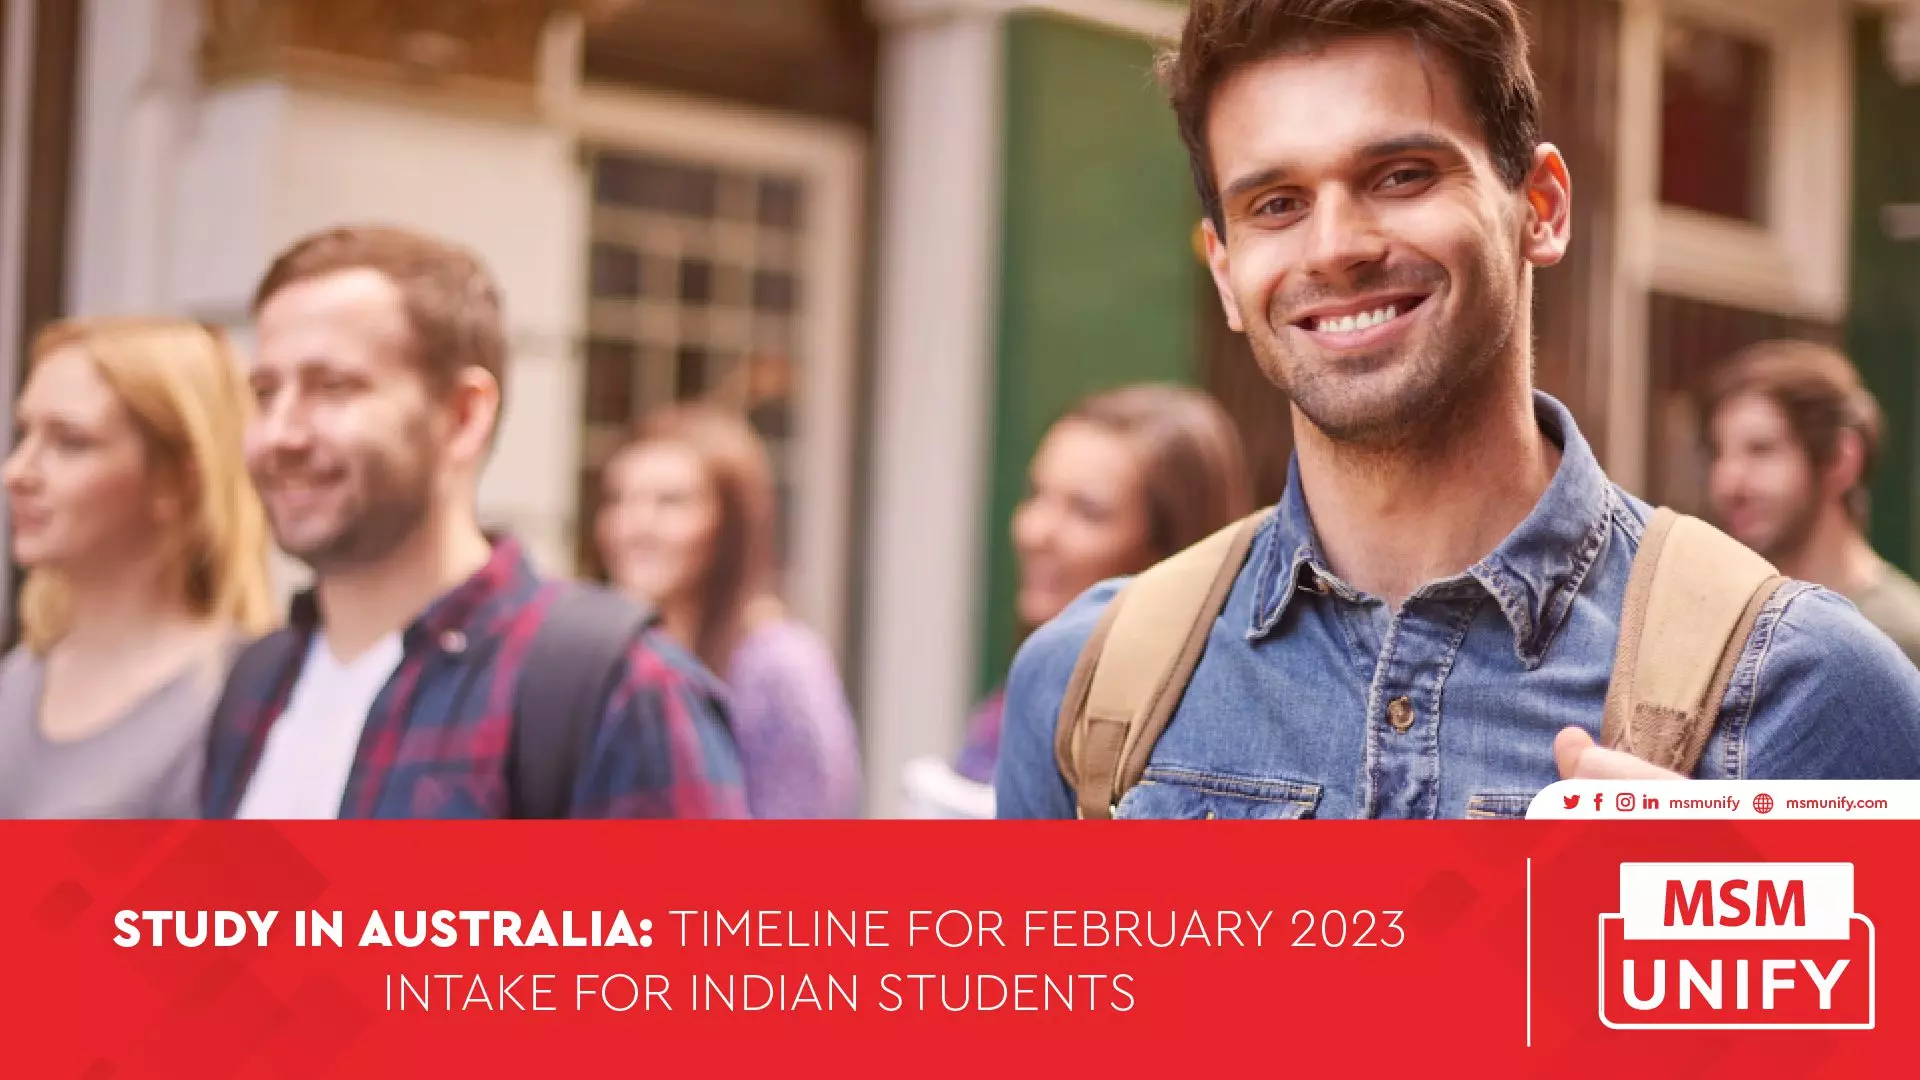 011923 MSM Unify Study in Australia Timeline for February 2023 Intake for Indian Students 01